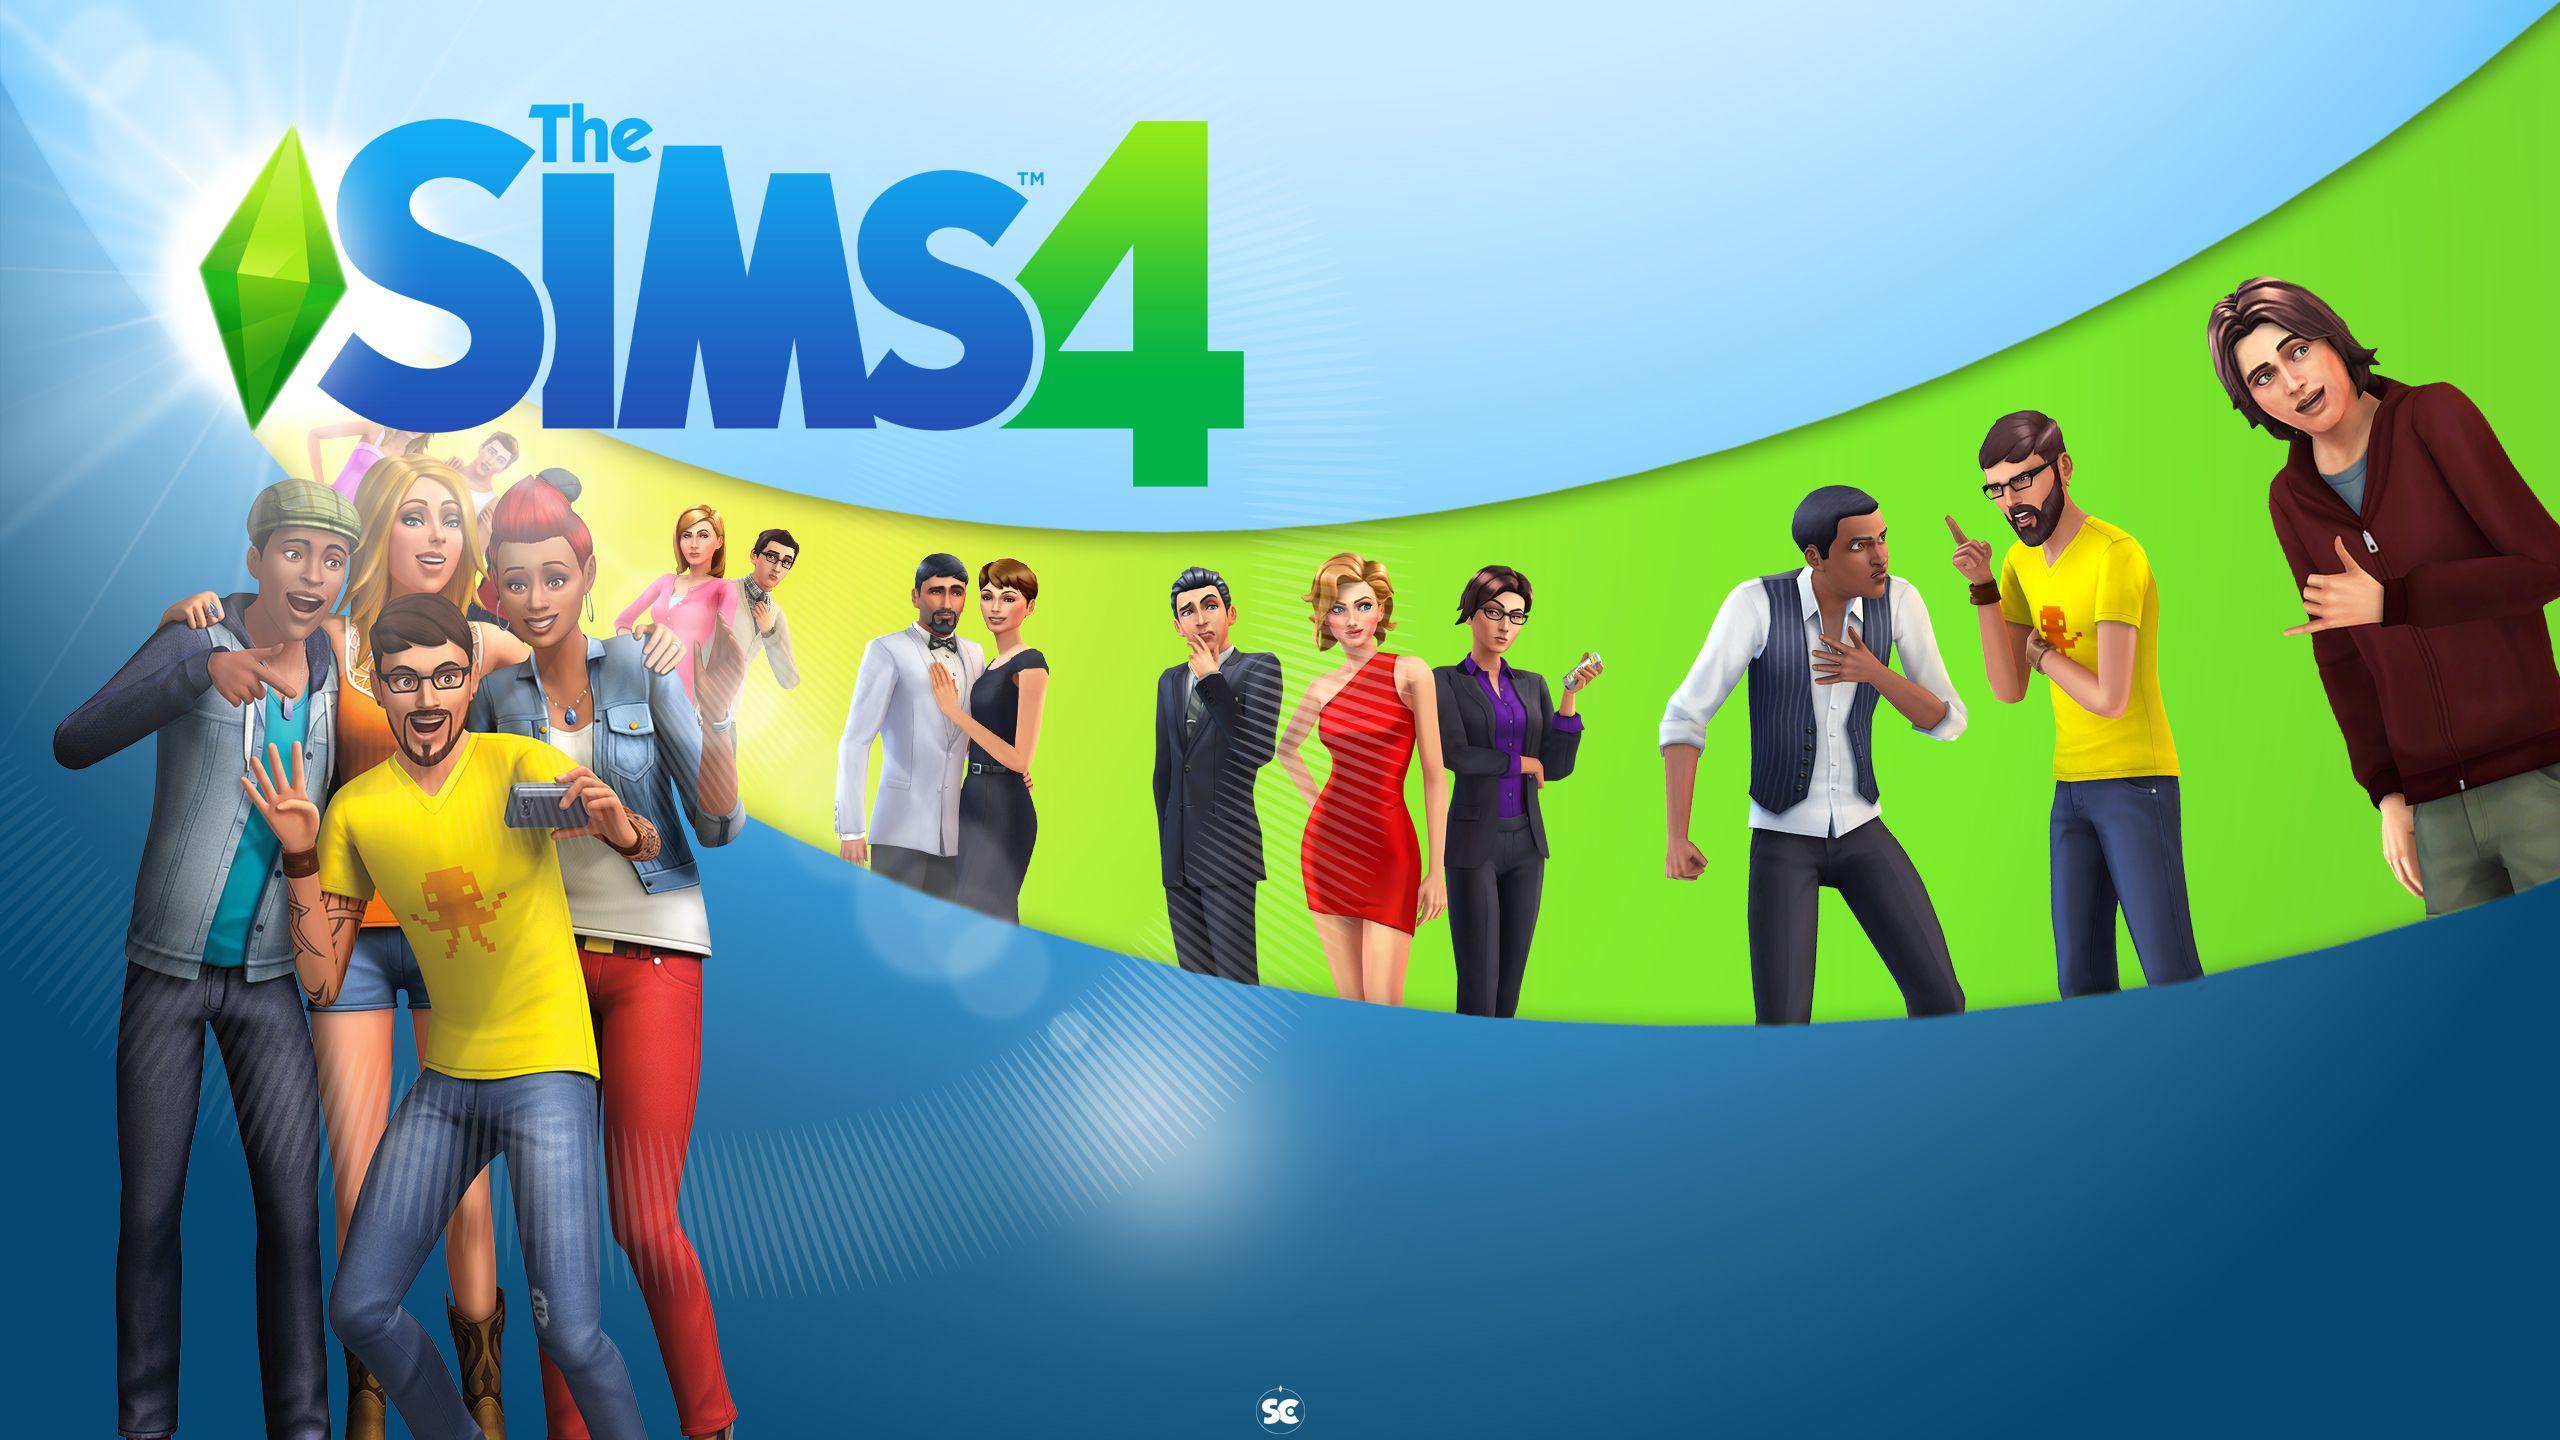 The Sims Wallpapers High Resolution and Quality Download